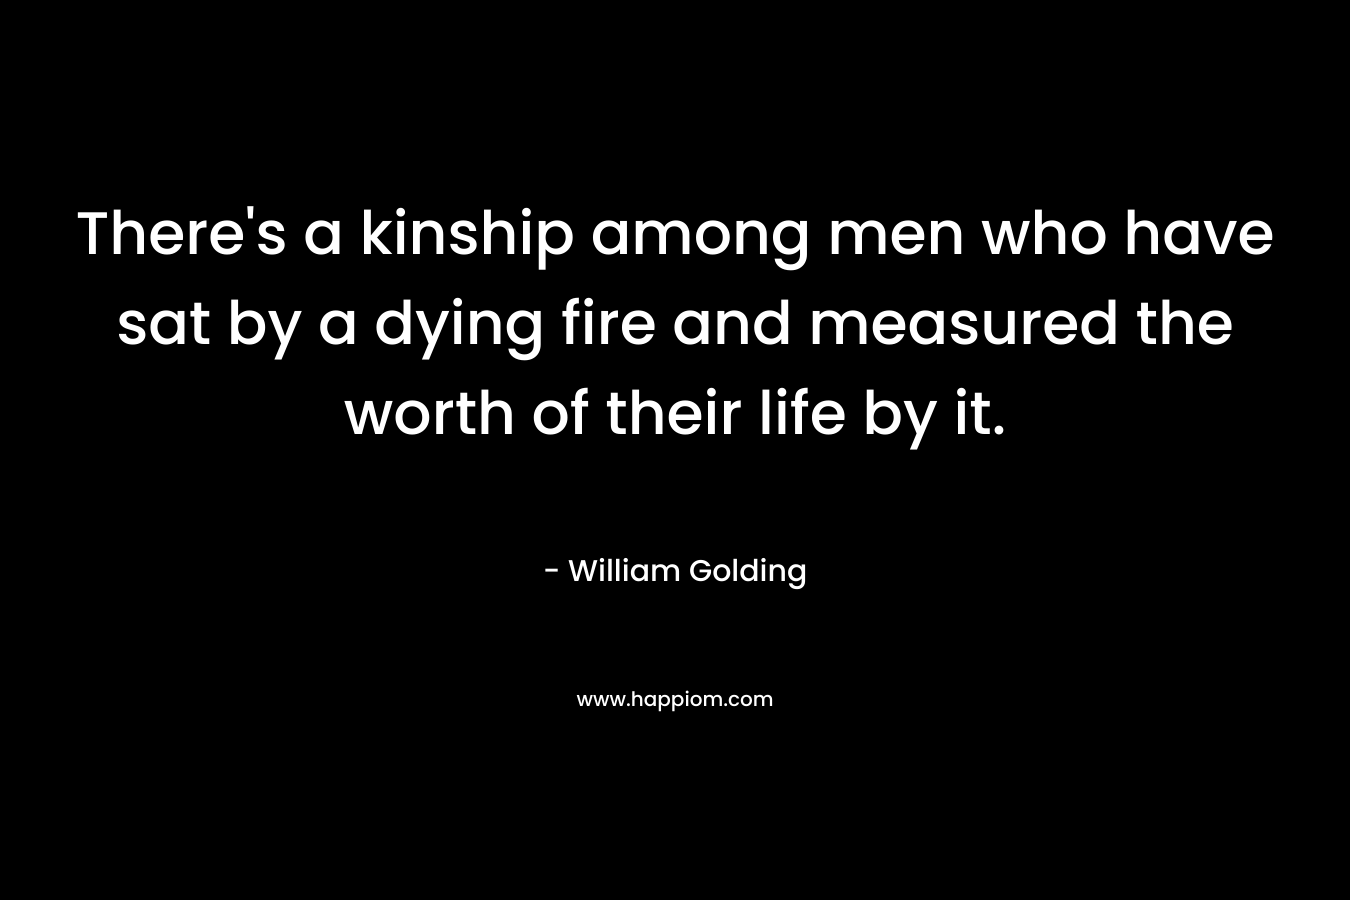 There’s a kinship among men who have sat by a dying fire and measured the worth of their life by it. – William Golding